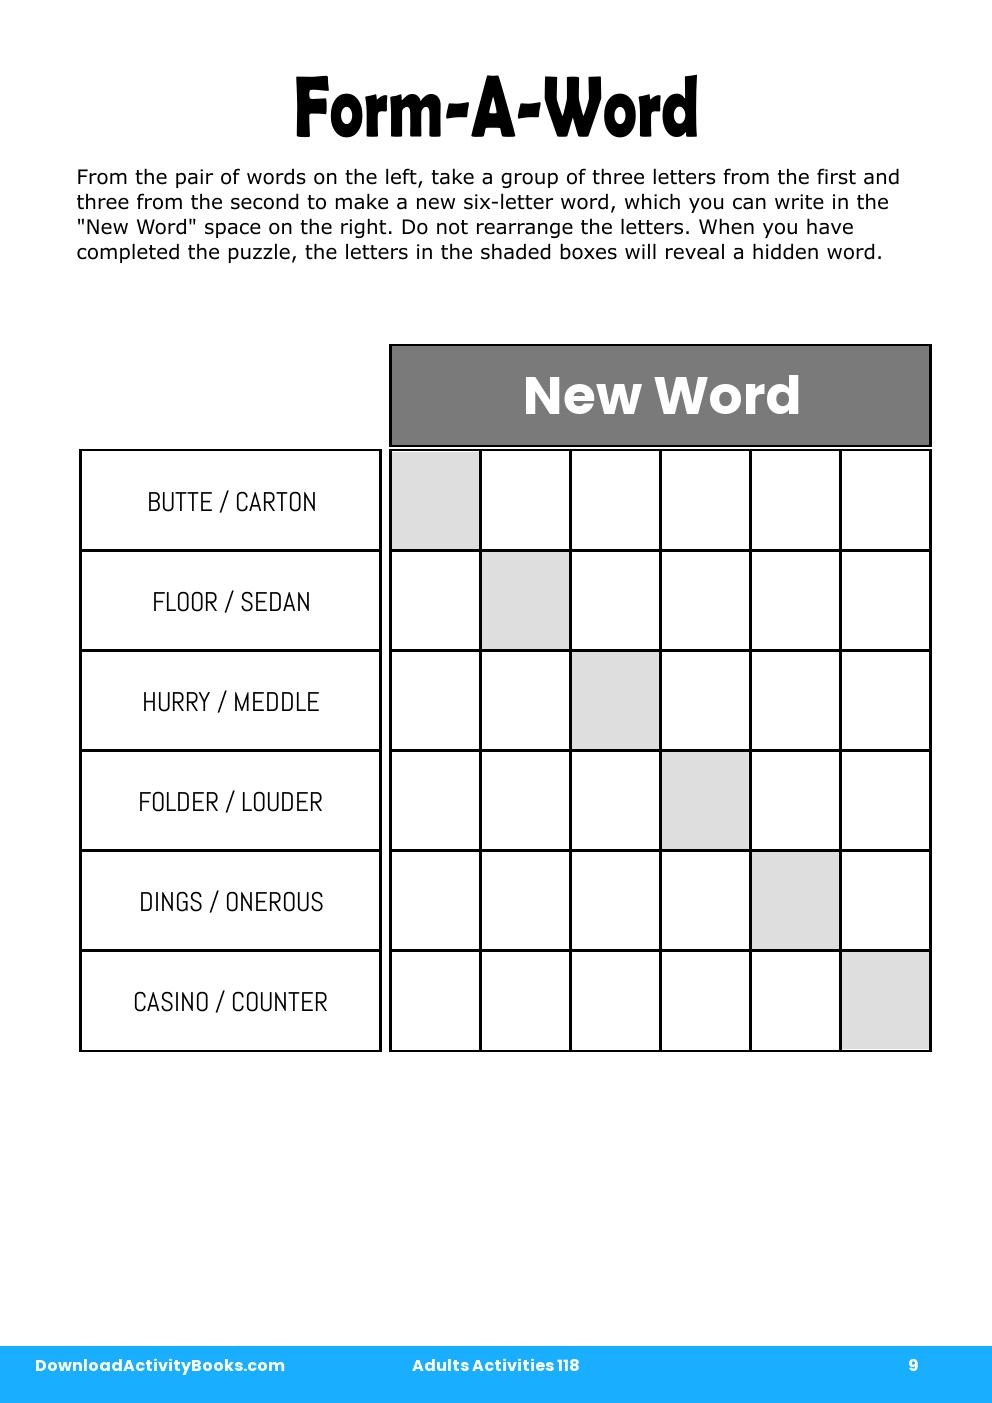 Form-A-Word in Adults Activities 118